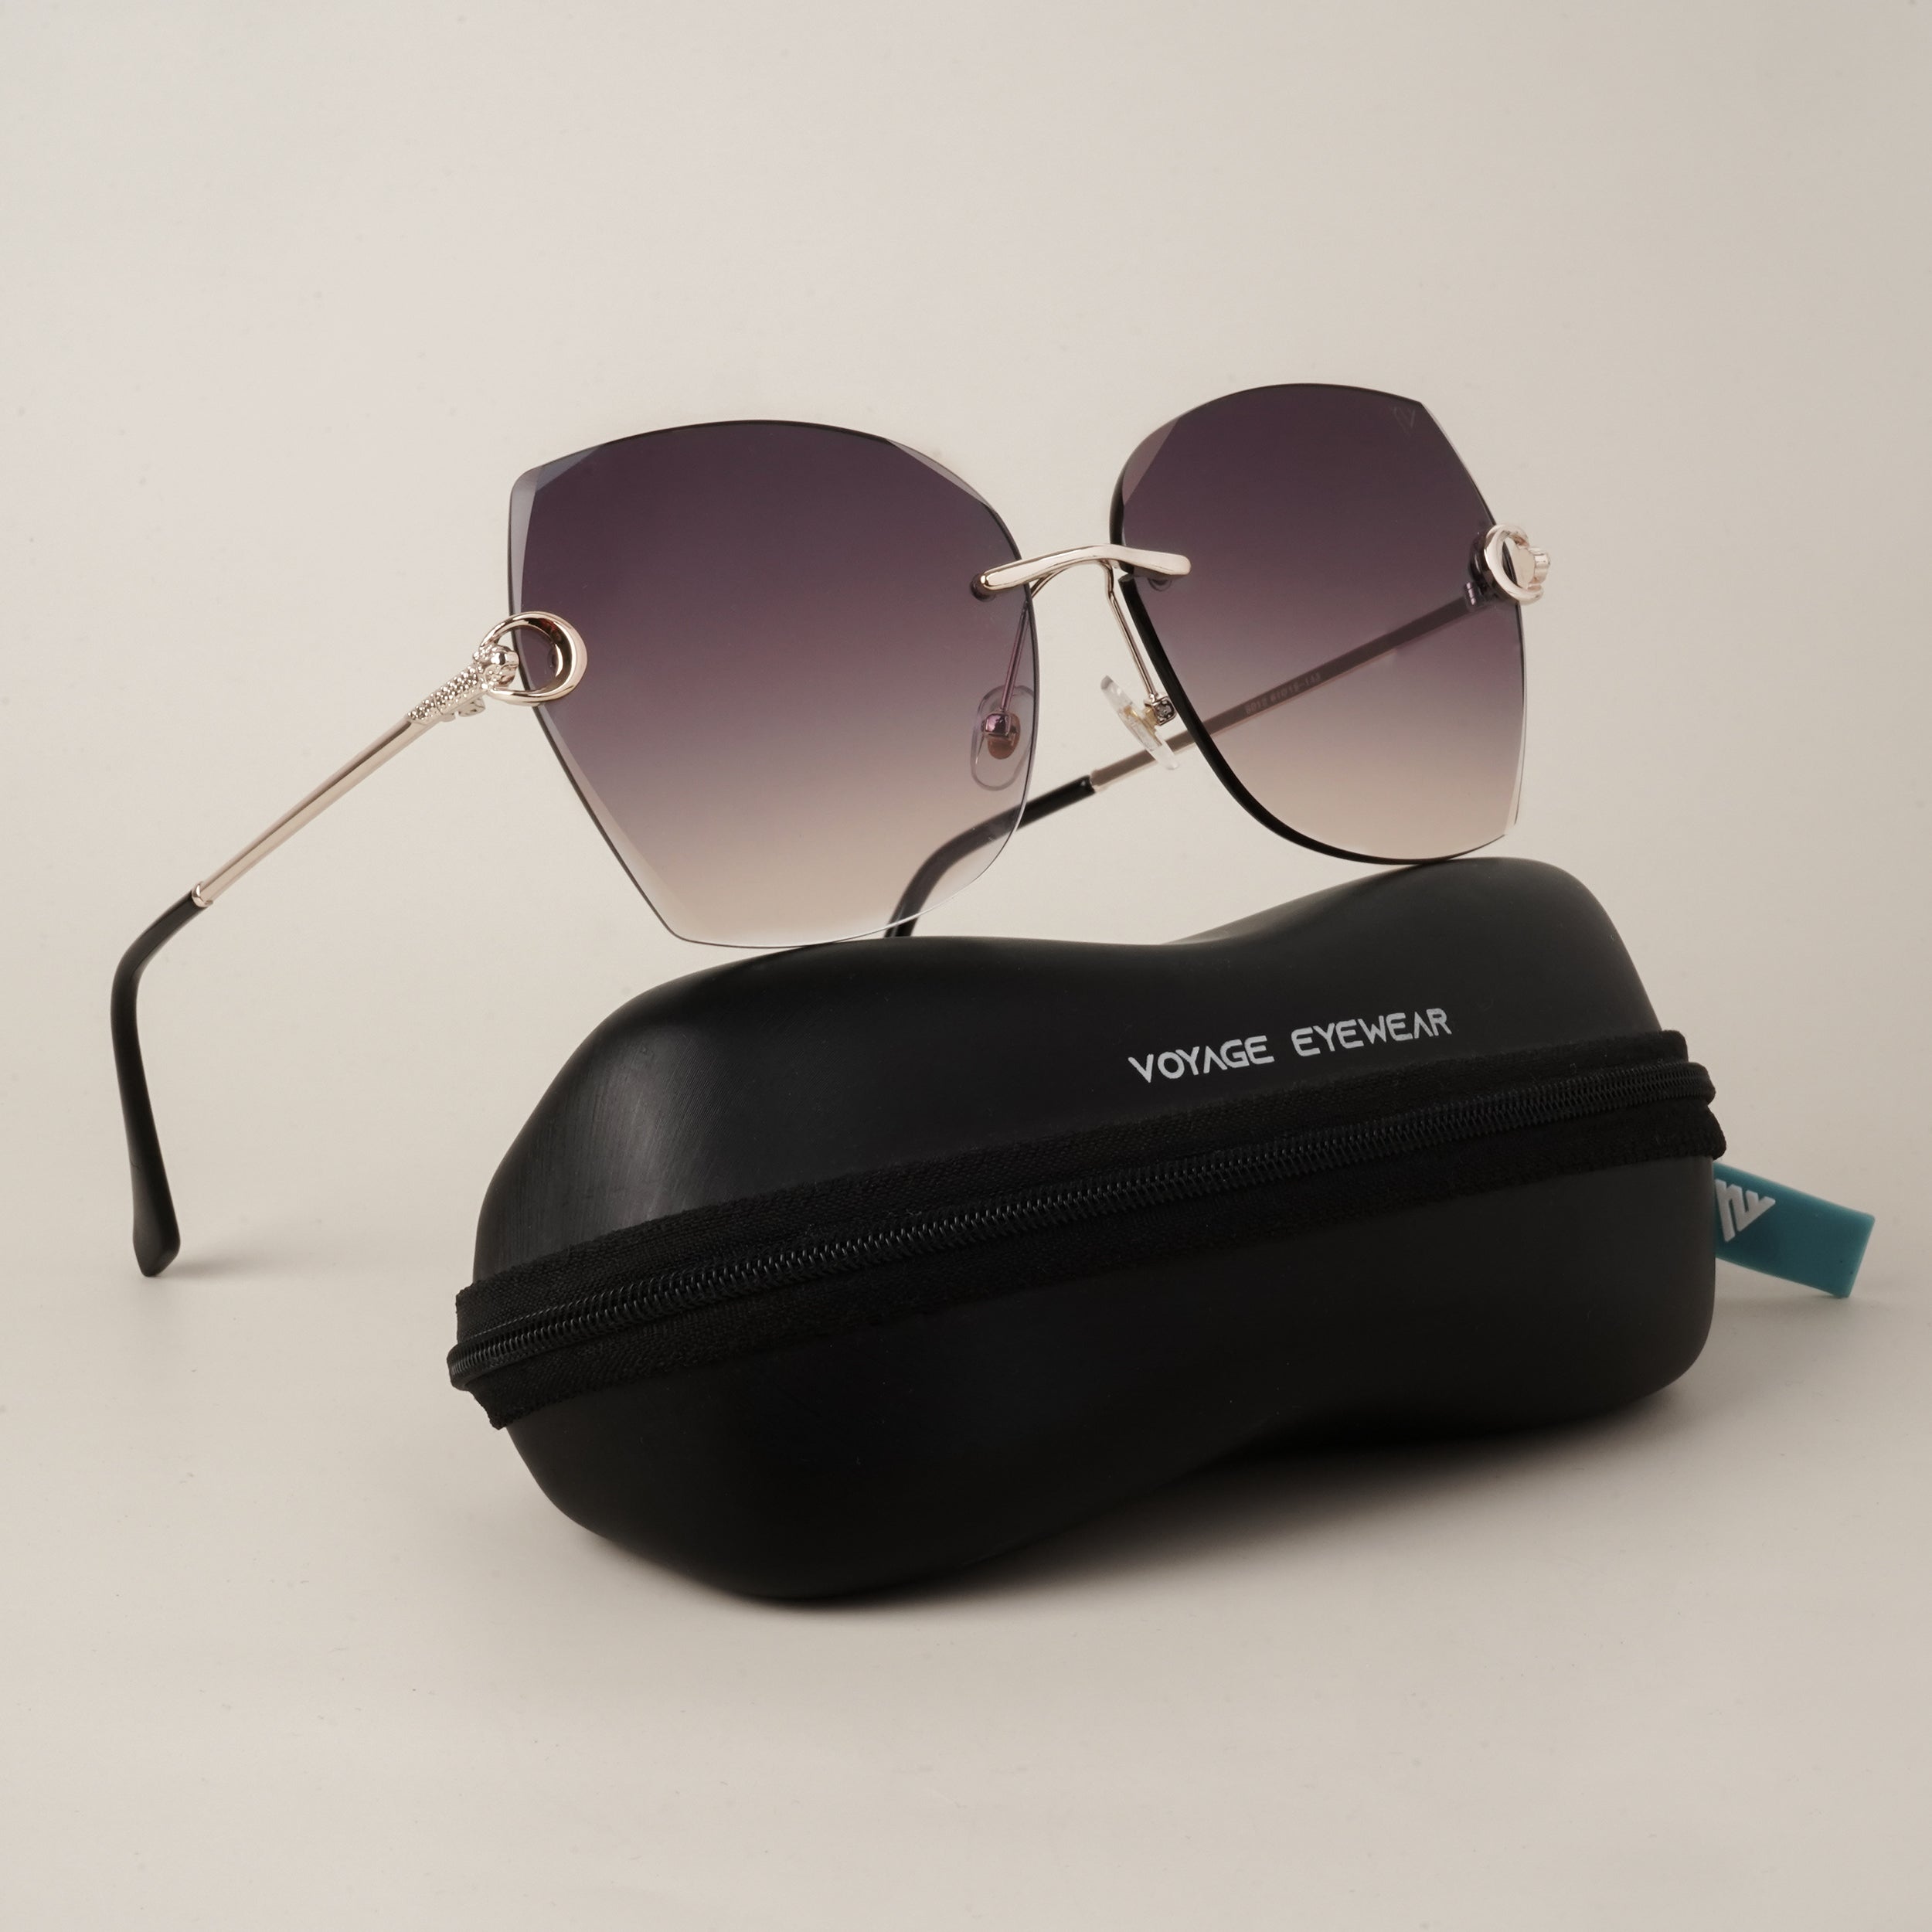 Voyage Black Over Size Sunglasses - MG2879